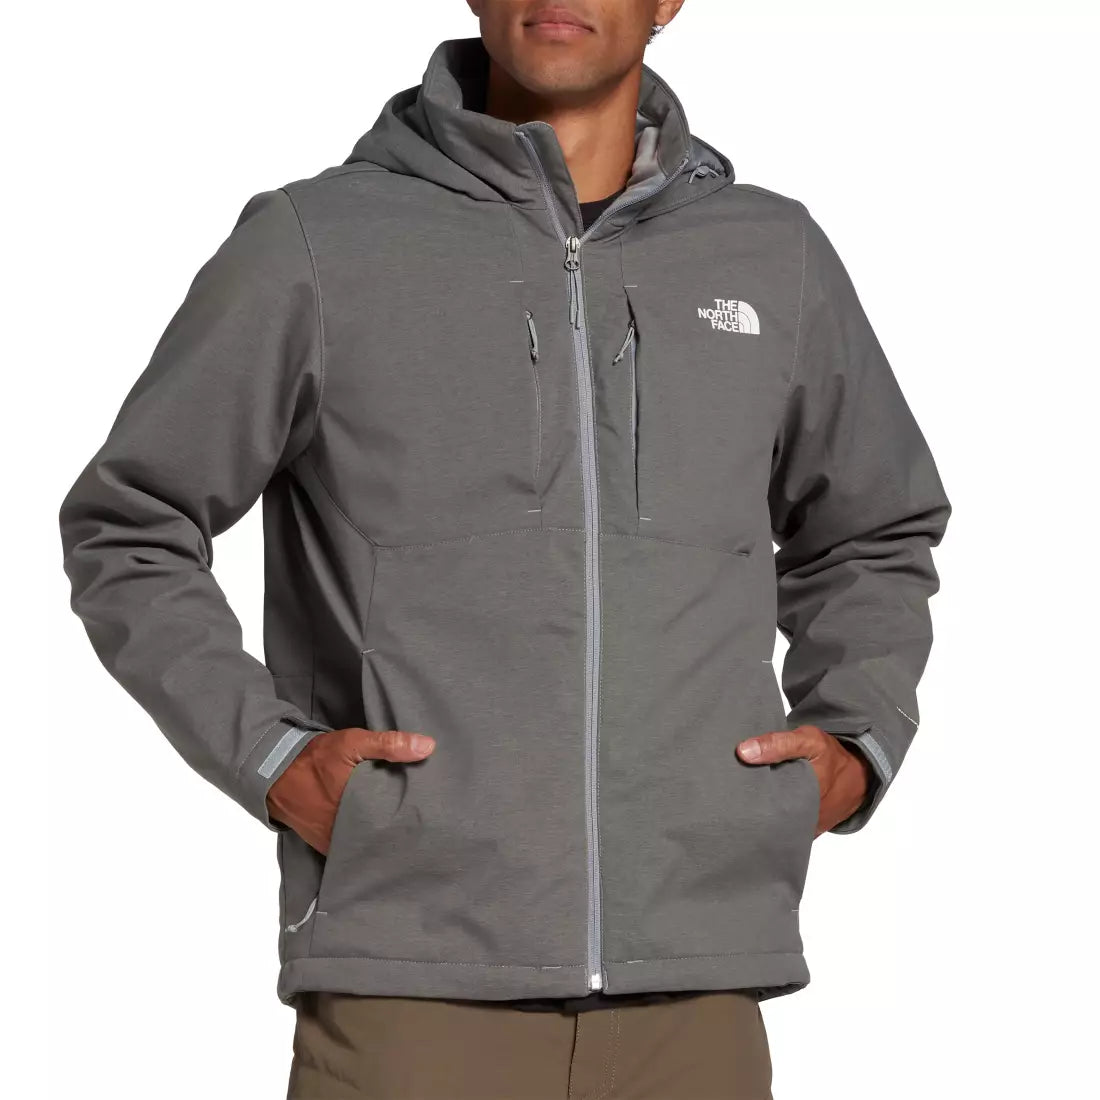 The North Face Men's Apex Elevation Jacket, Size XXL